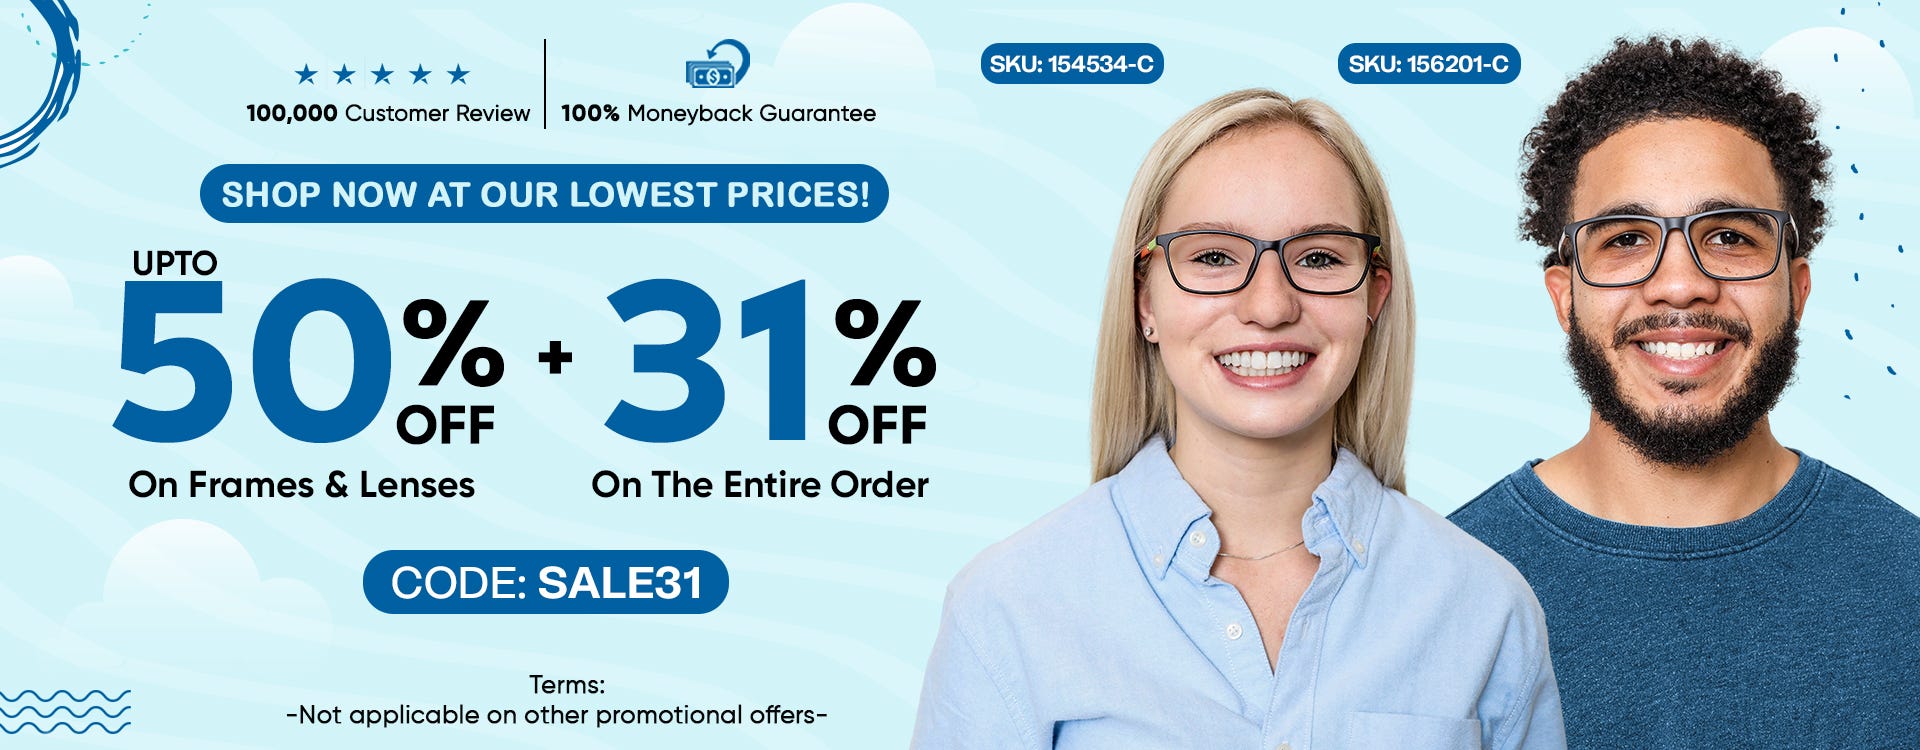 UPTO 50% Discount On All Frames & Lenses + 31% OFF On The Entire Order CODE: SALE31